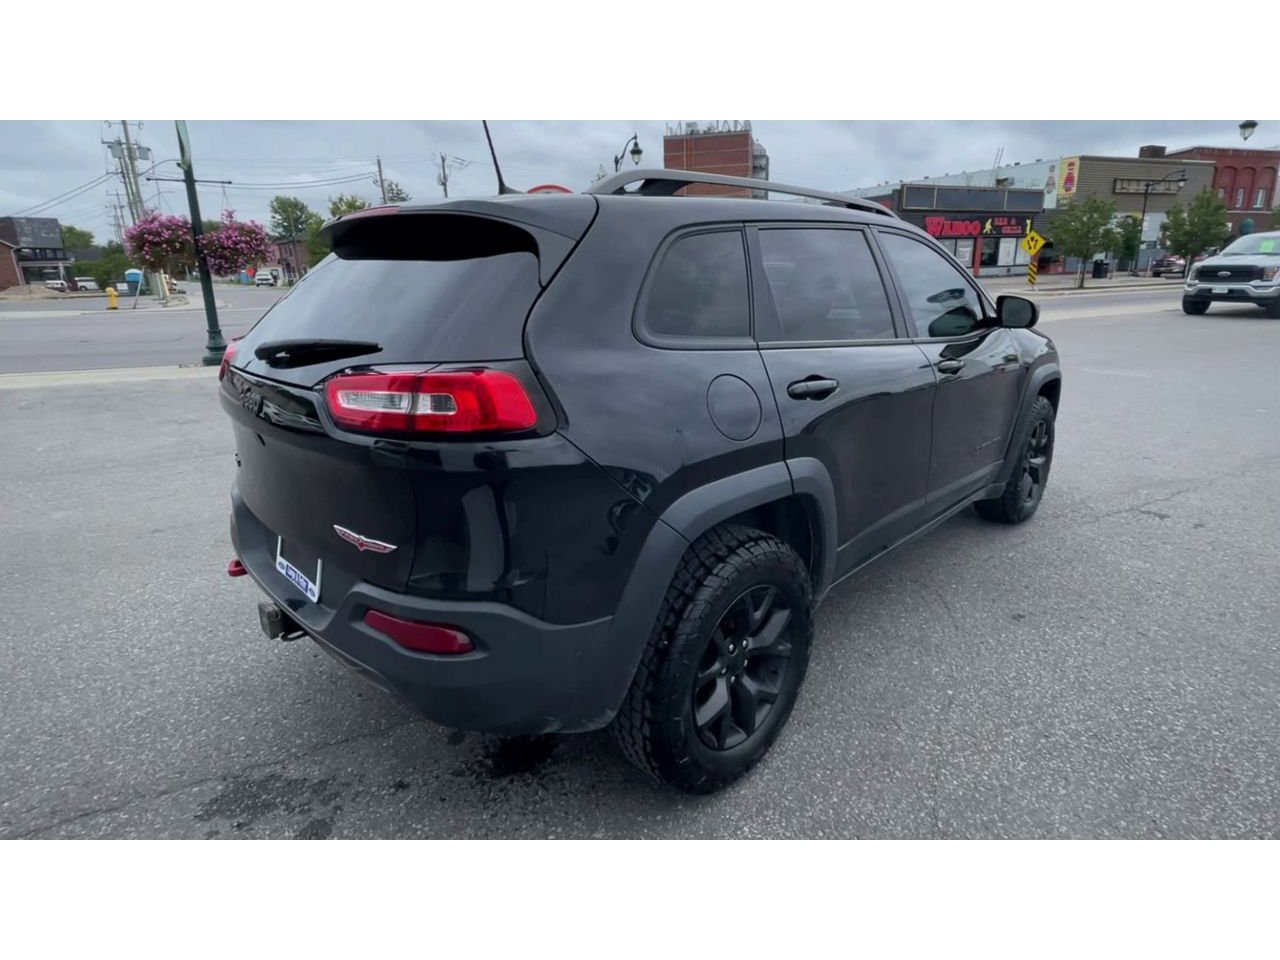 2016 Jeep Cherokee - P21241A Full Image 8